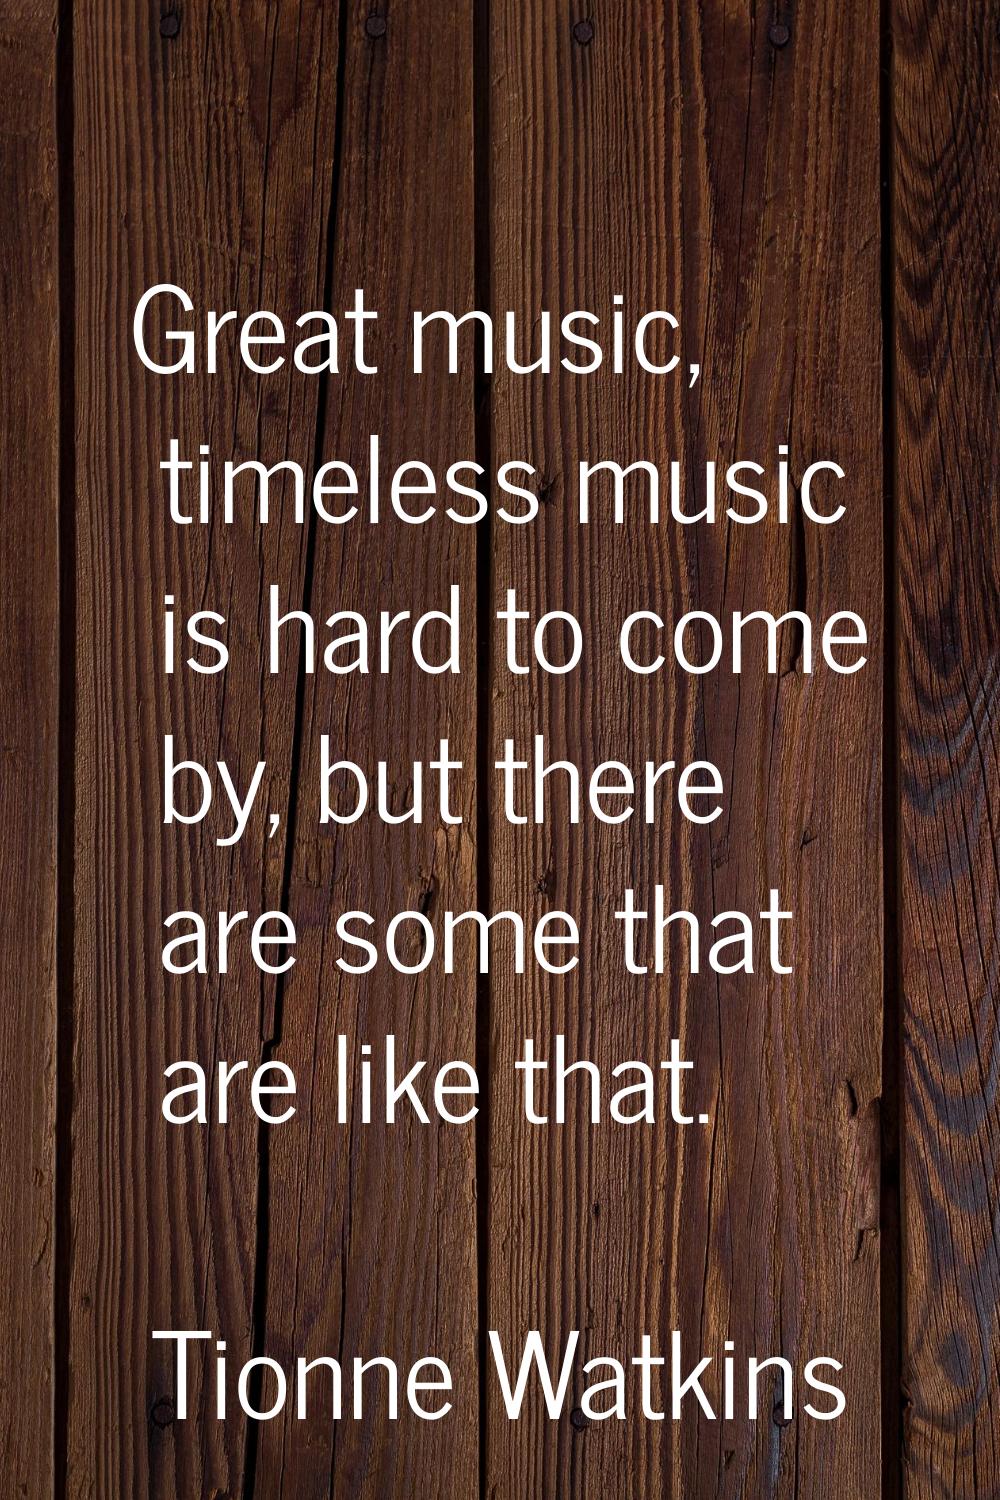 Great music, timeless music is hard to come by, but there are some that are like that.